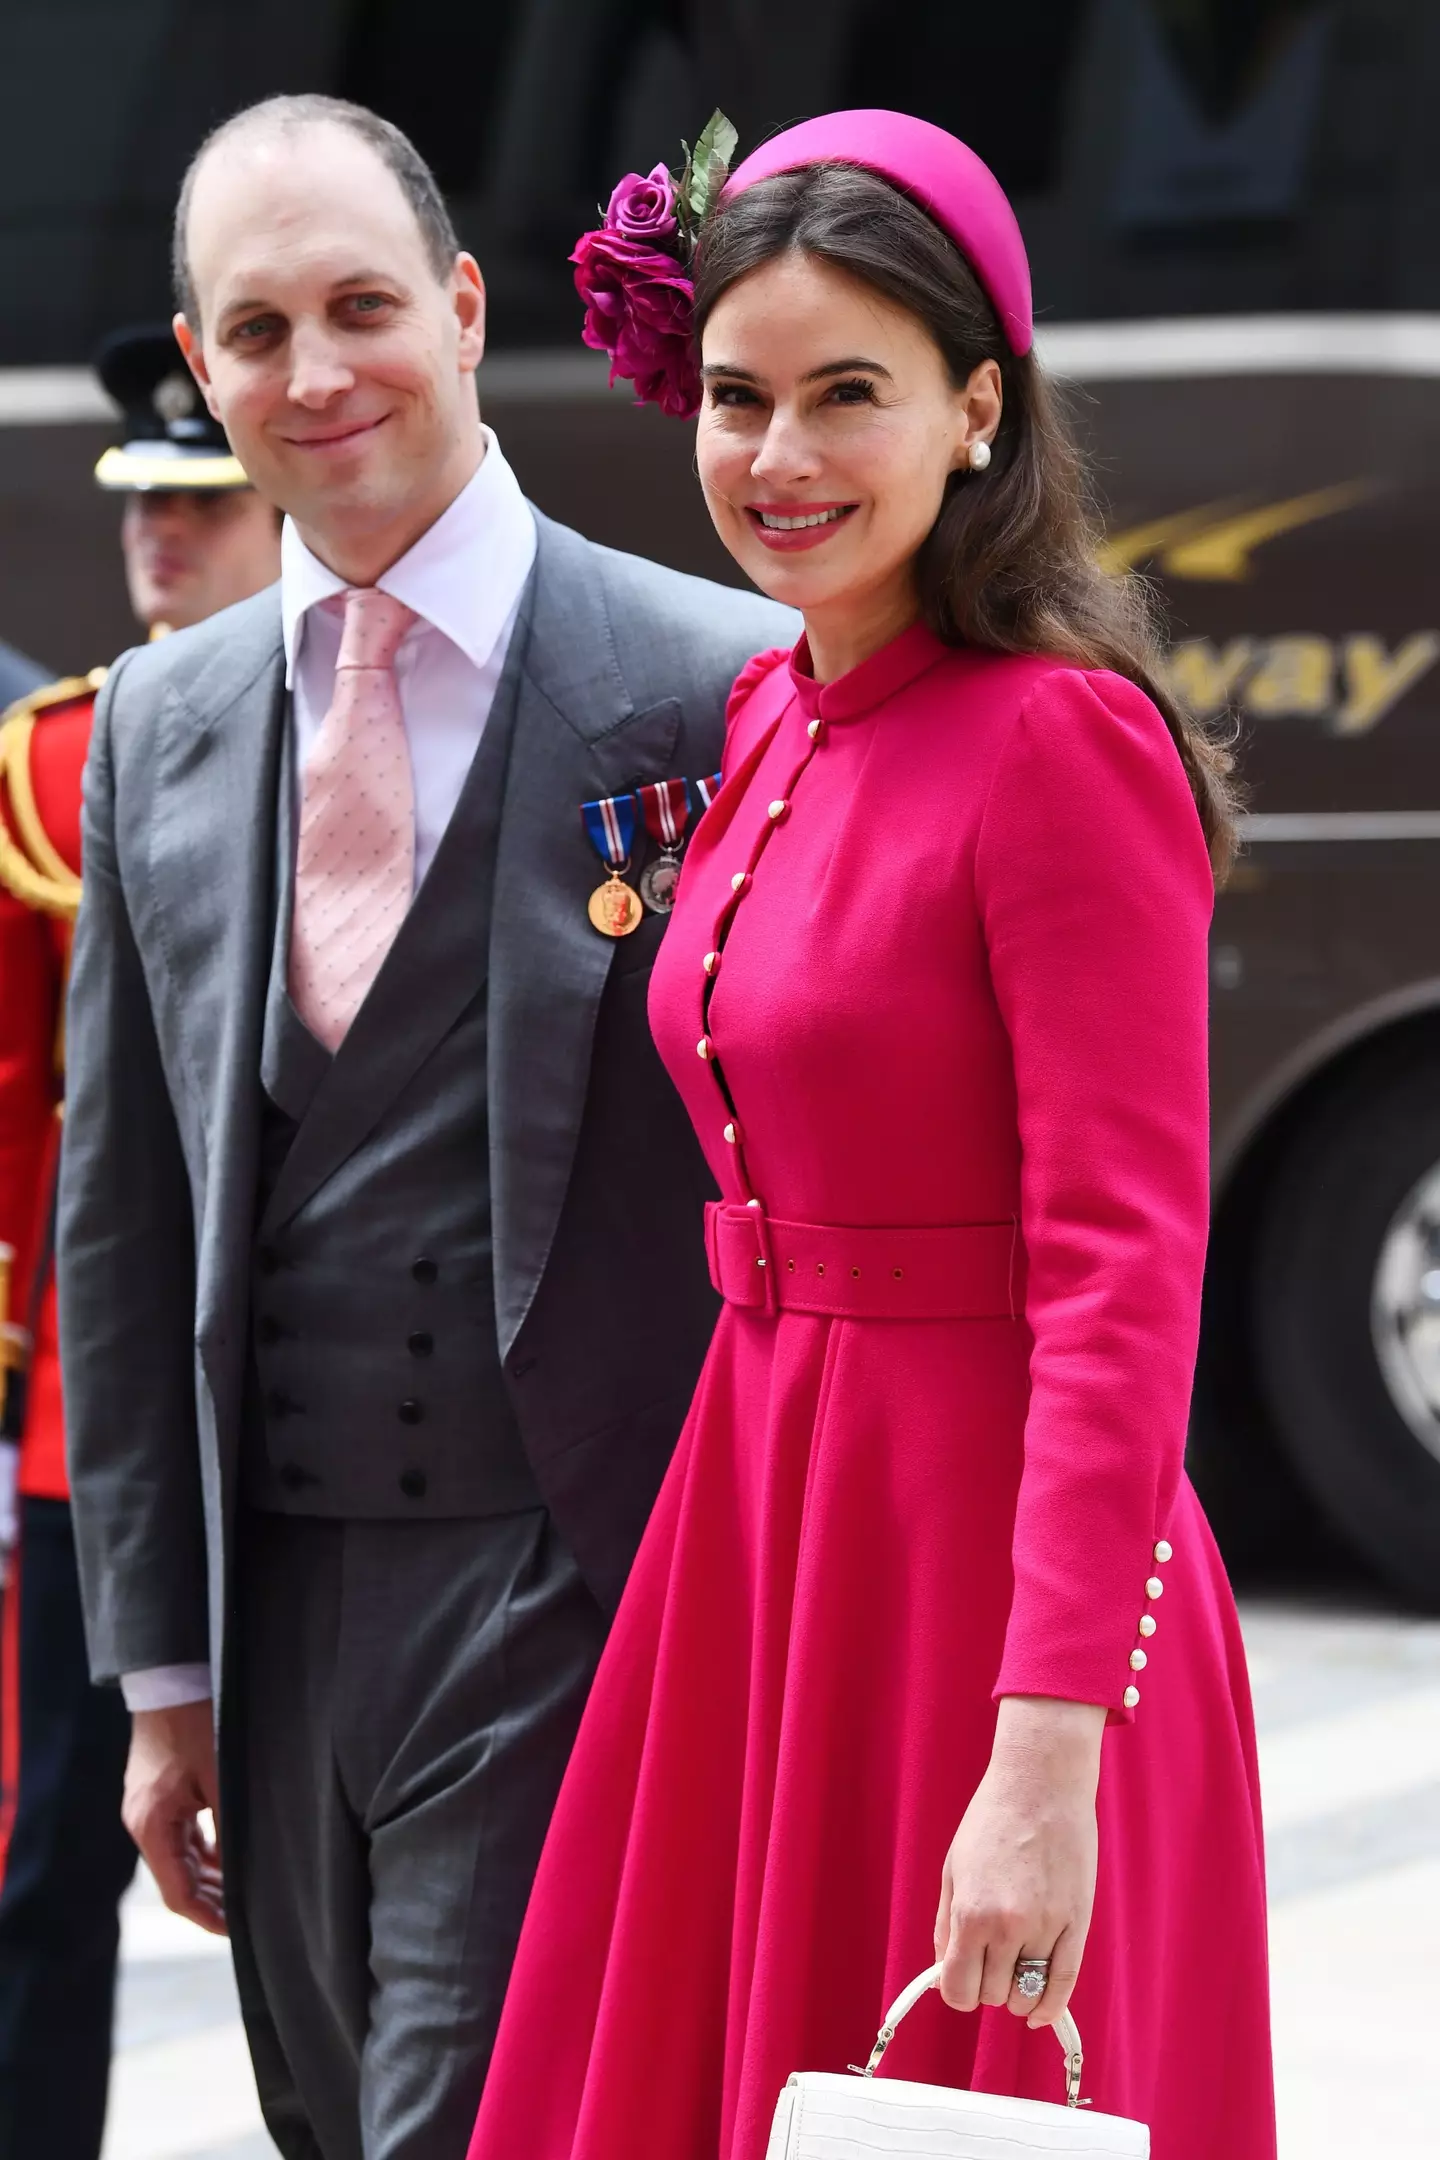 Lord Frederick Windsor and Sophie Winkleman at today's service of thanksgiving.